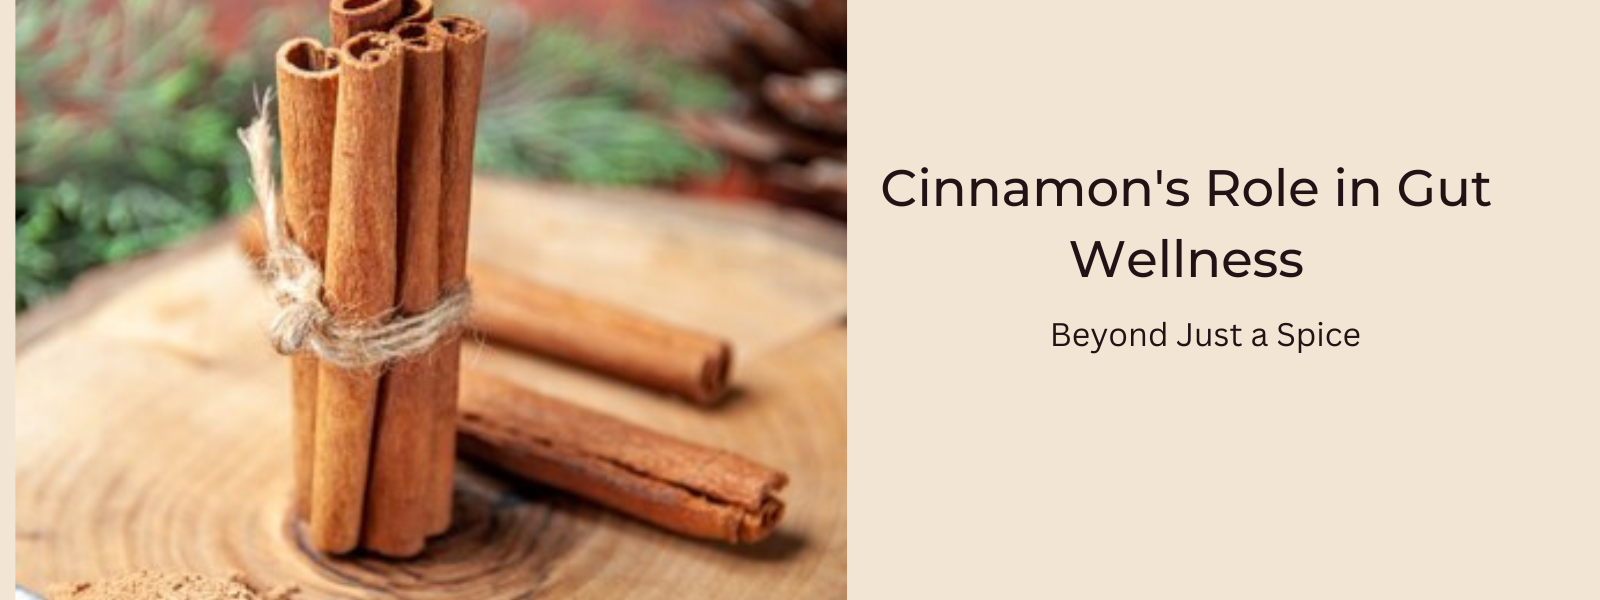 Cinnamon's Role in Gut Wellness: Beyond Just a Spice